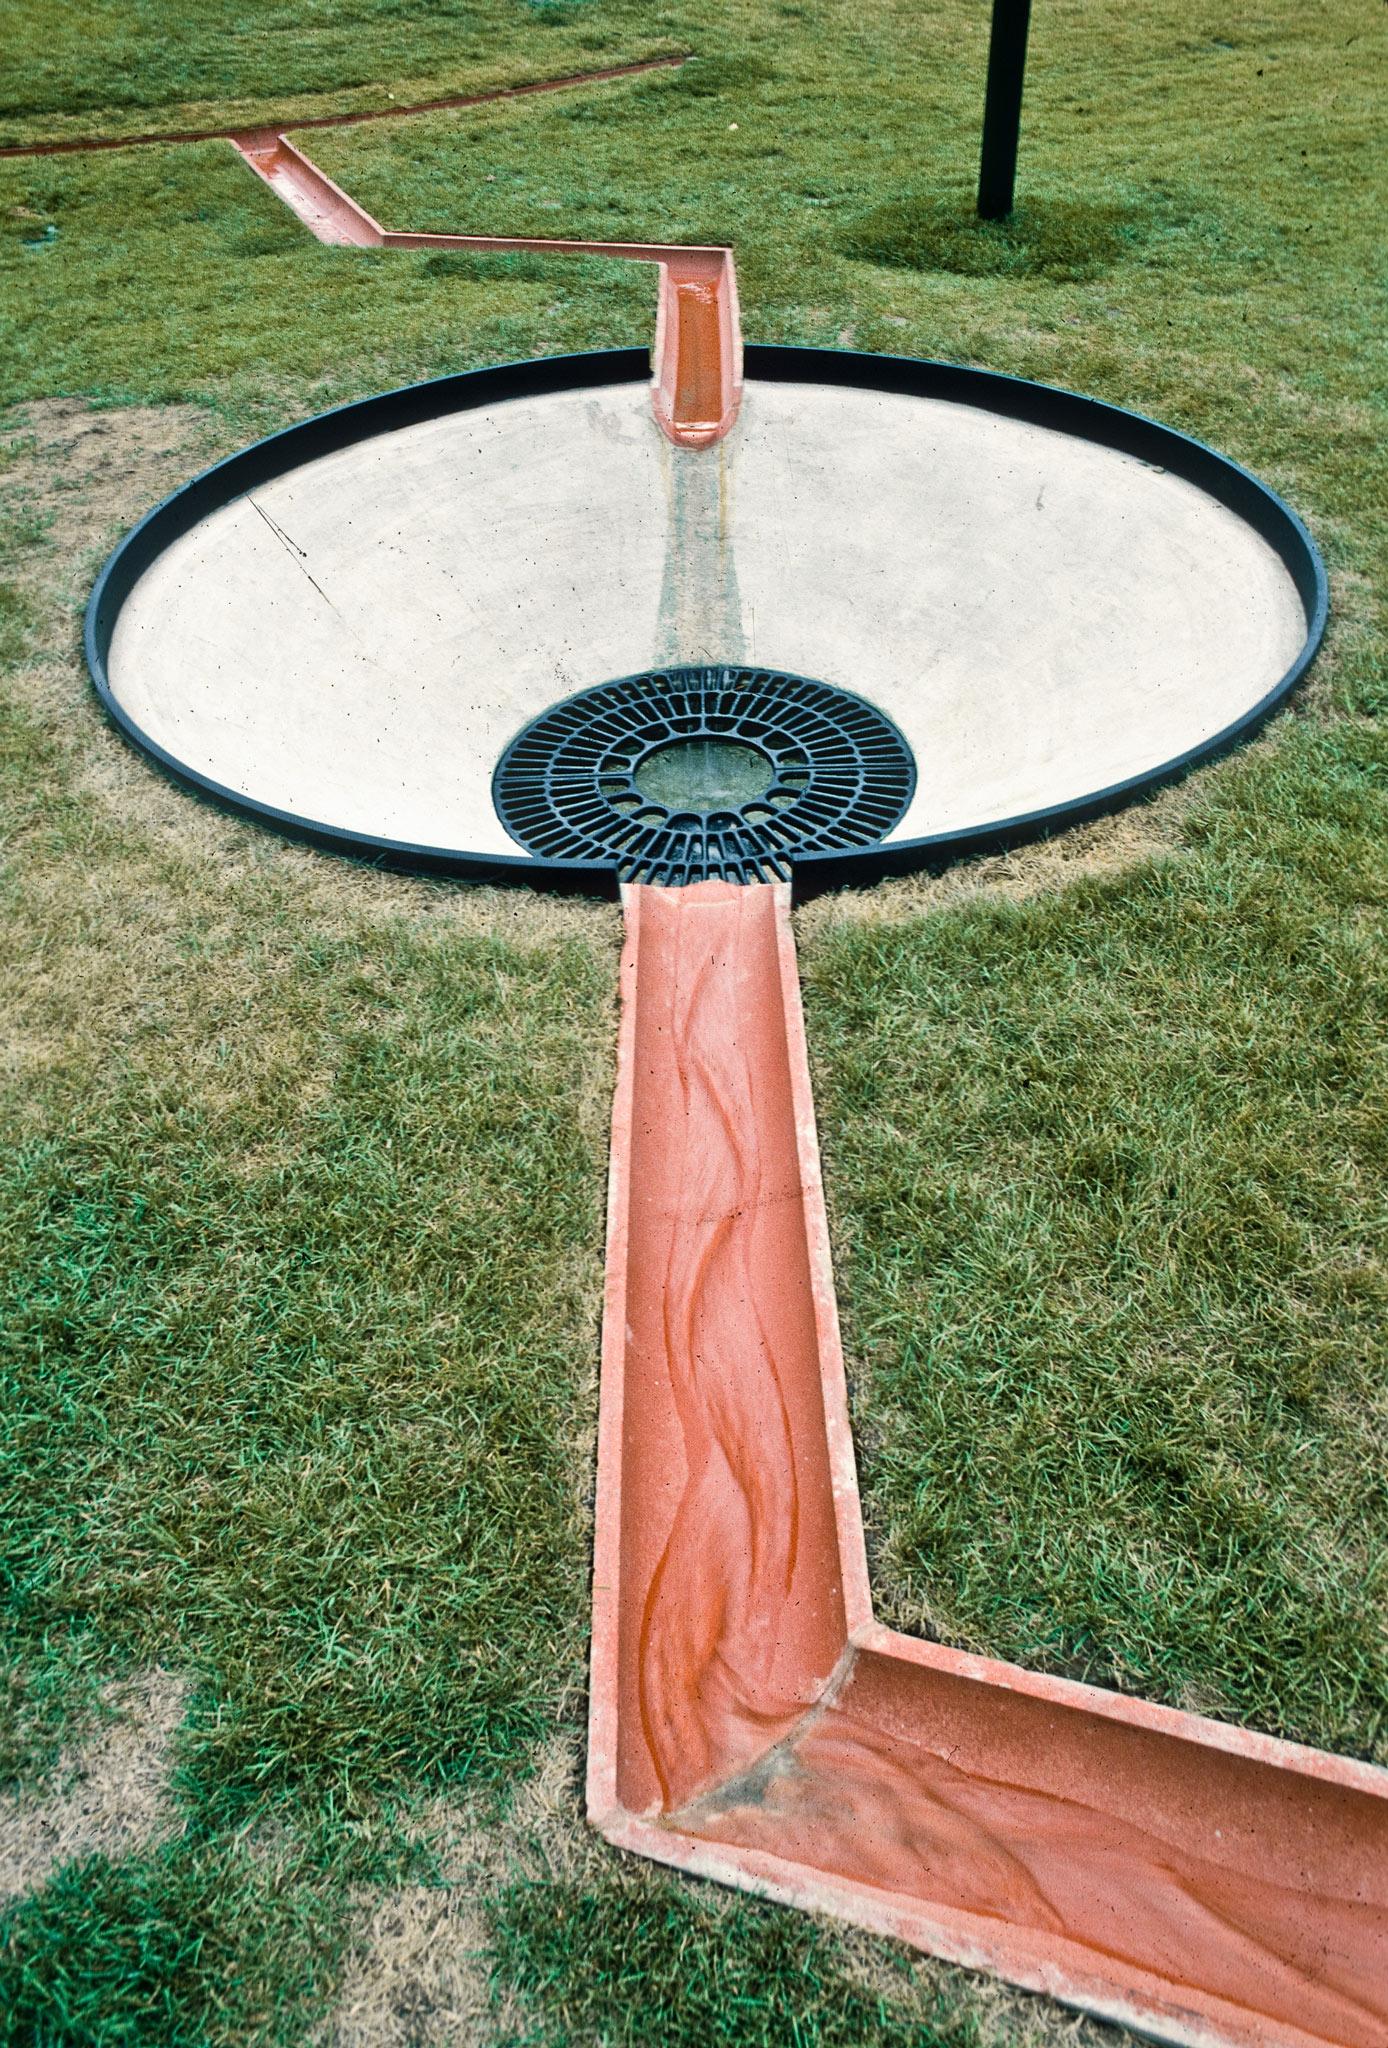 a land drainage sculpture made of terra cotta pipes and a concrete drain in Toronto